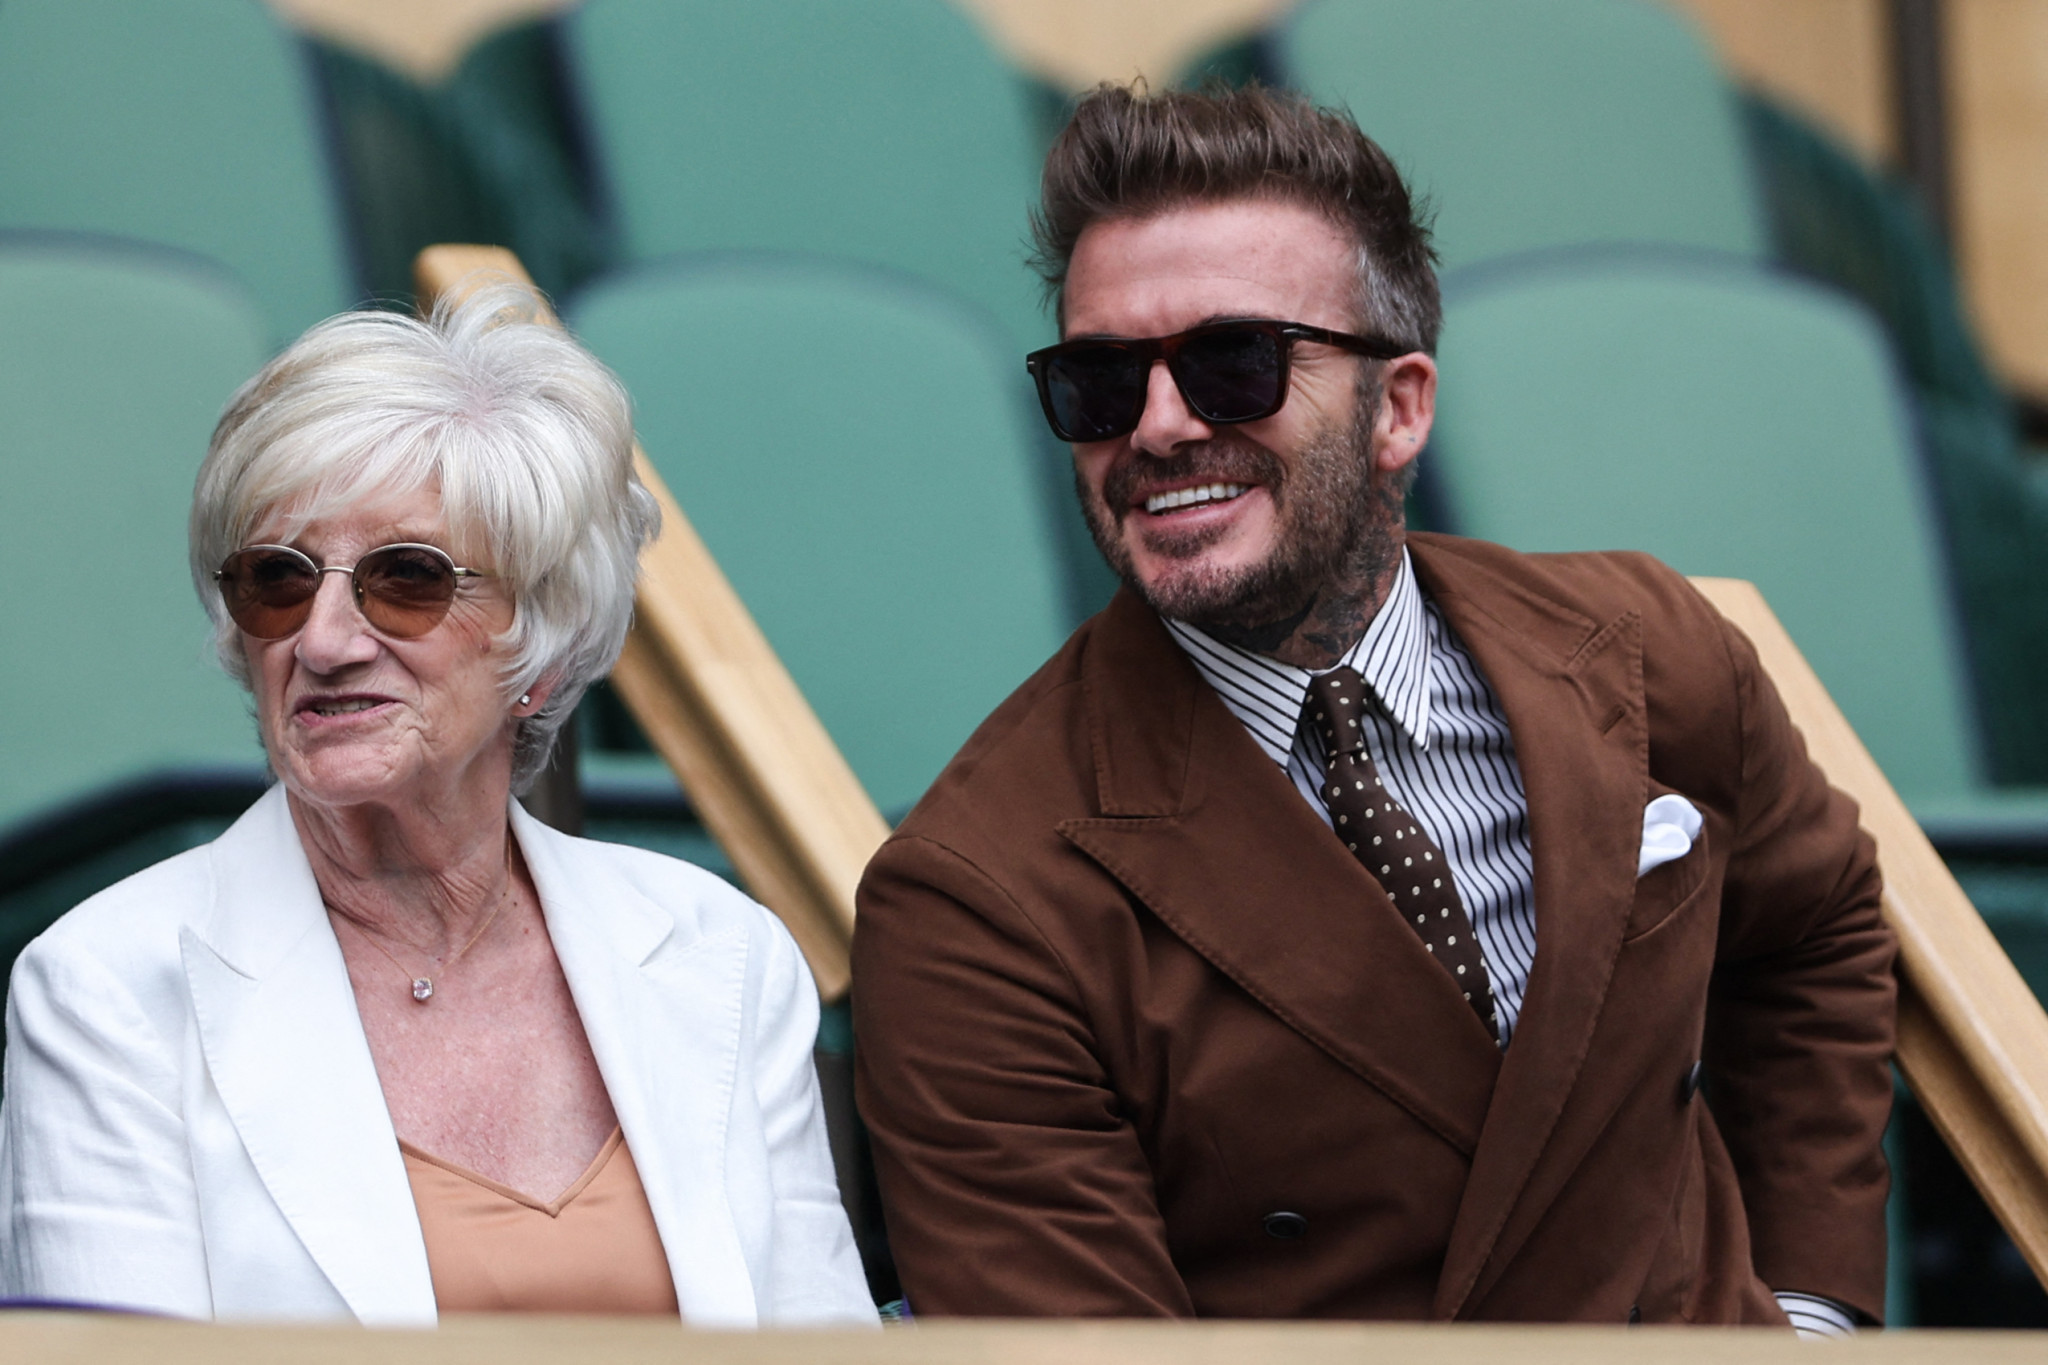 Celebrities such as David Beckham attended Centre Court today ©Getty Images